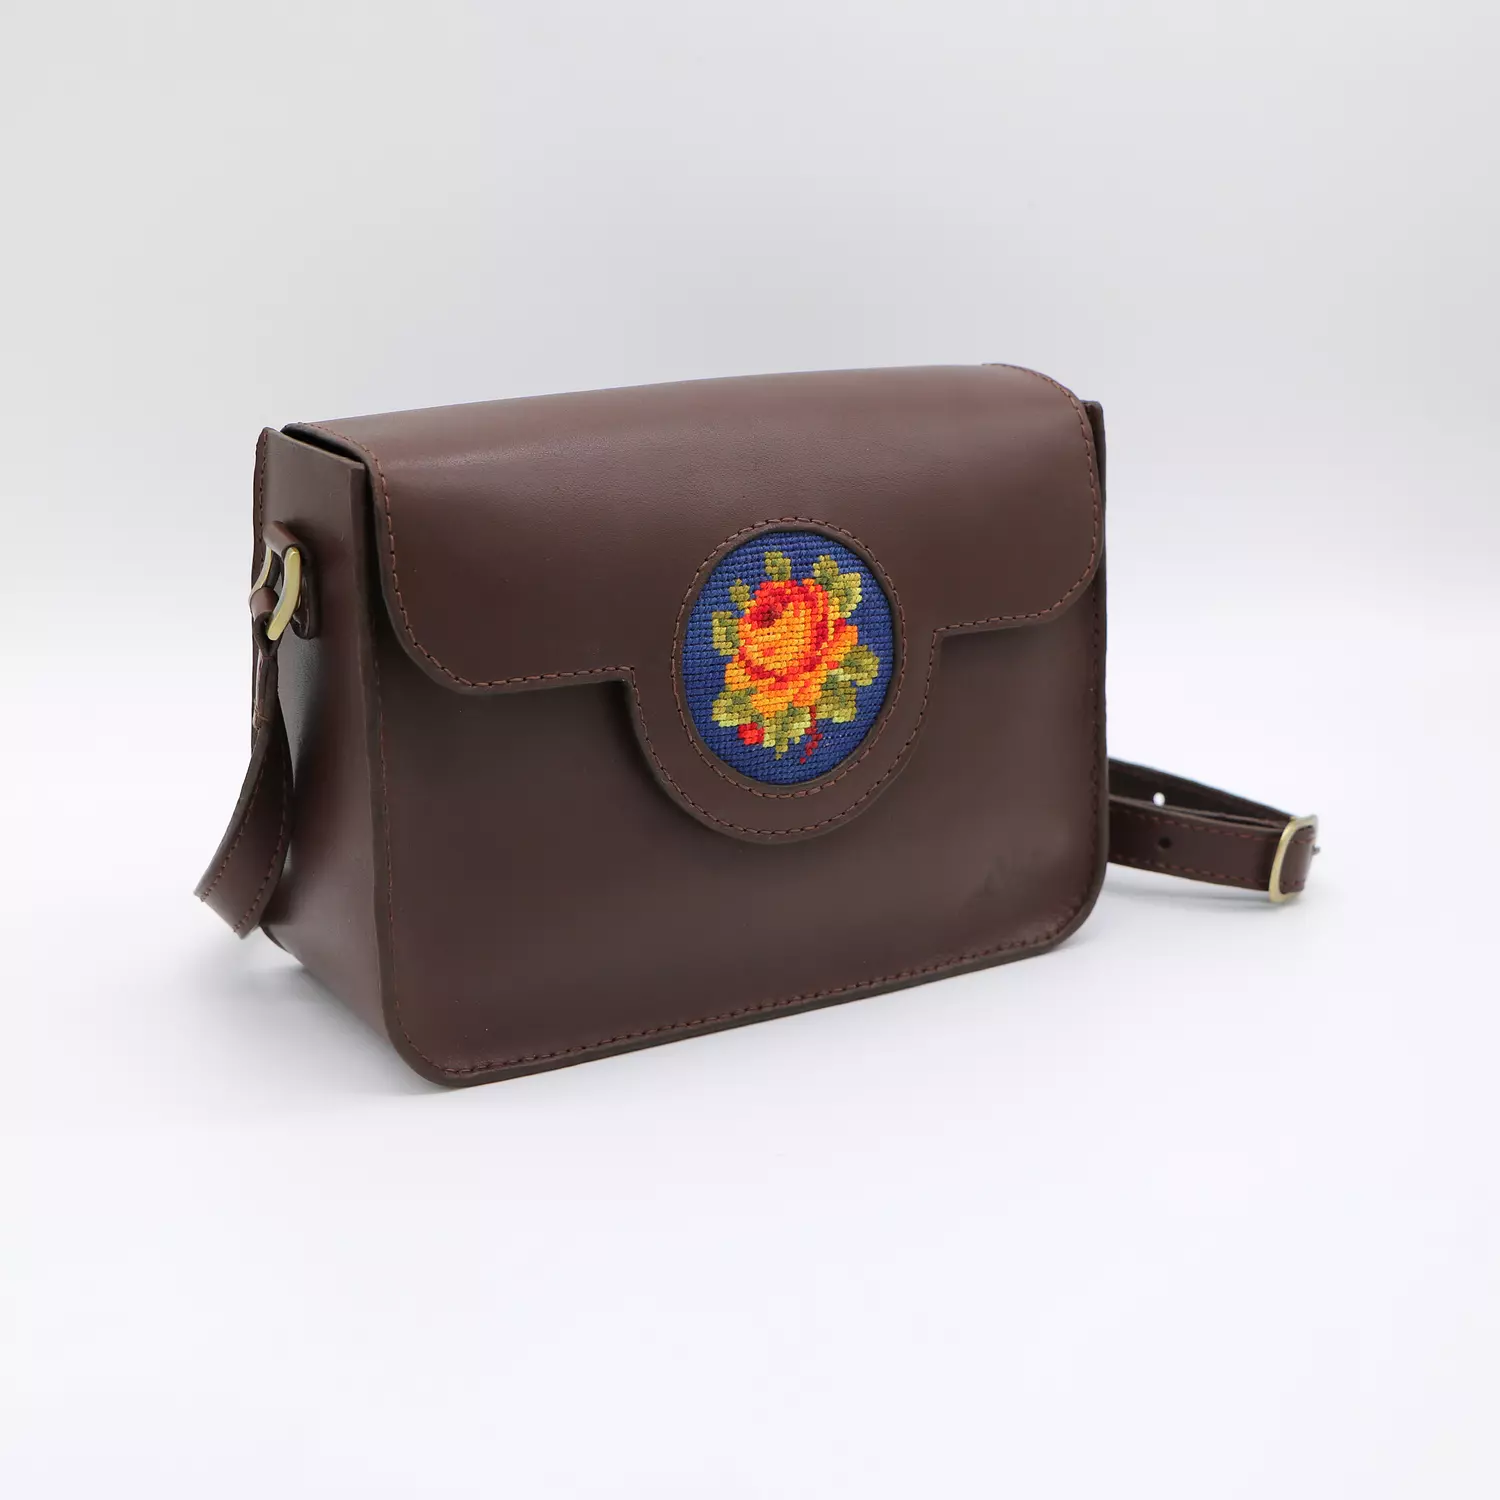   Genuine leather bag with floral design. 1